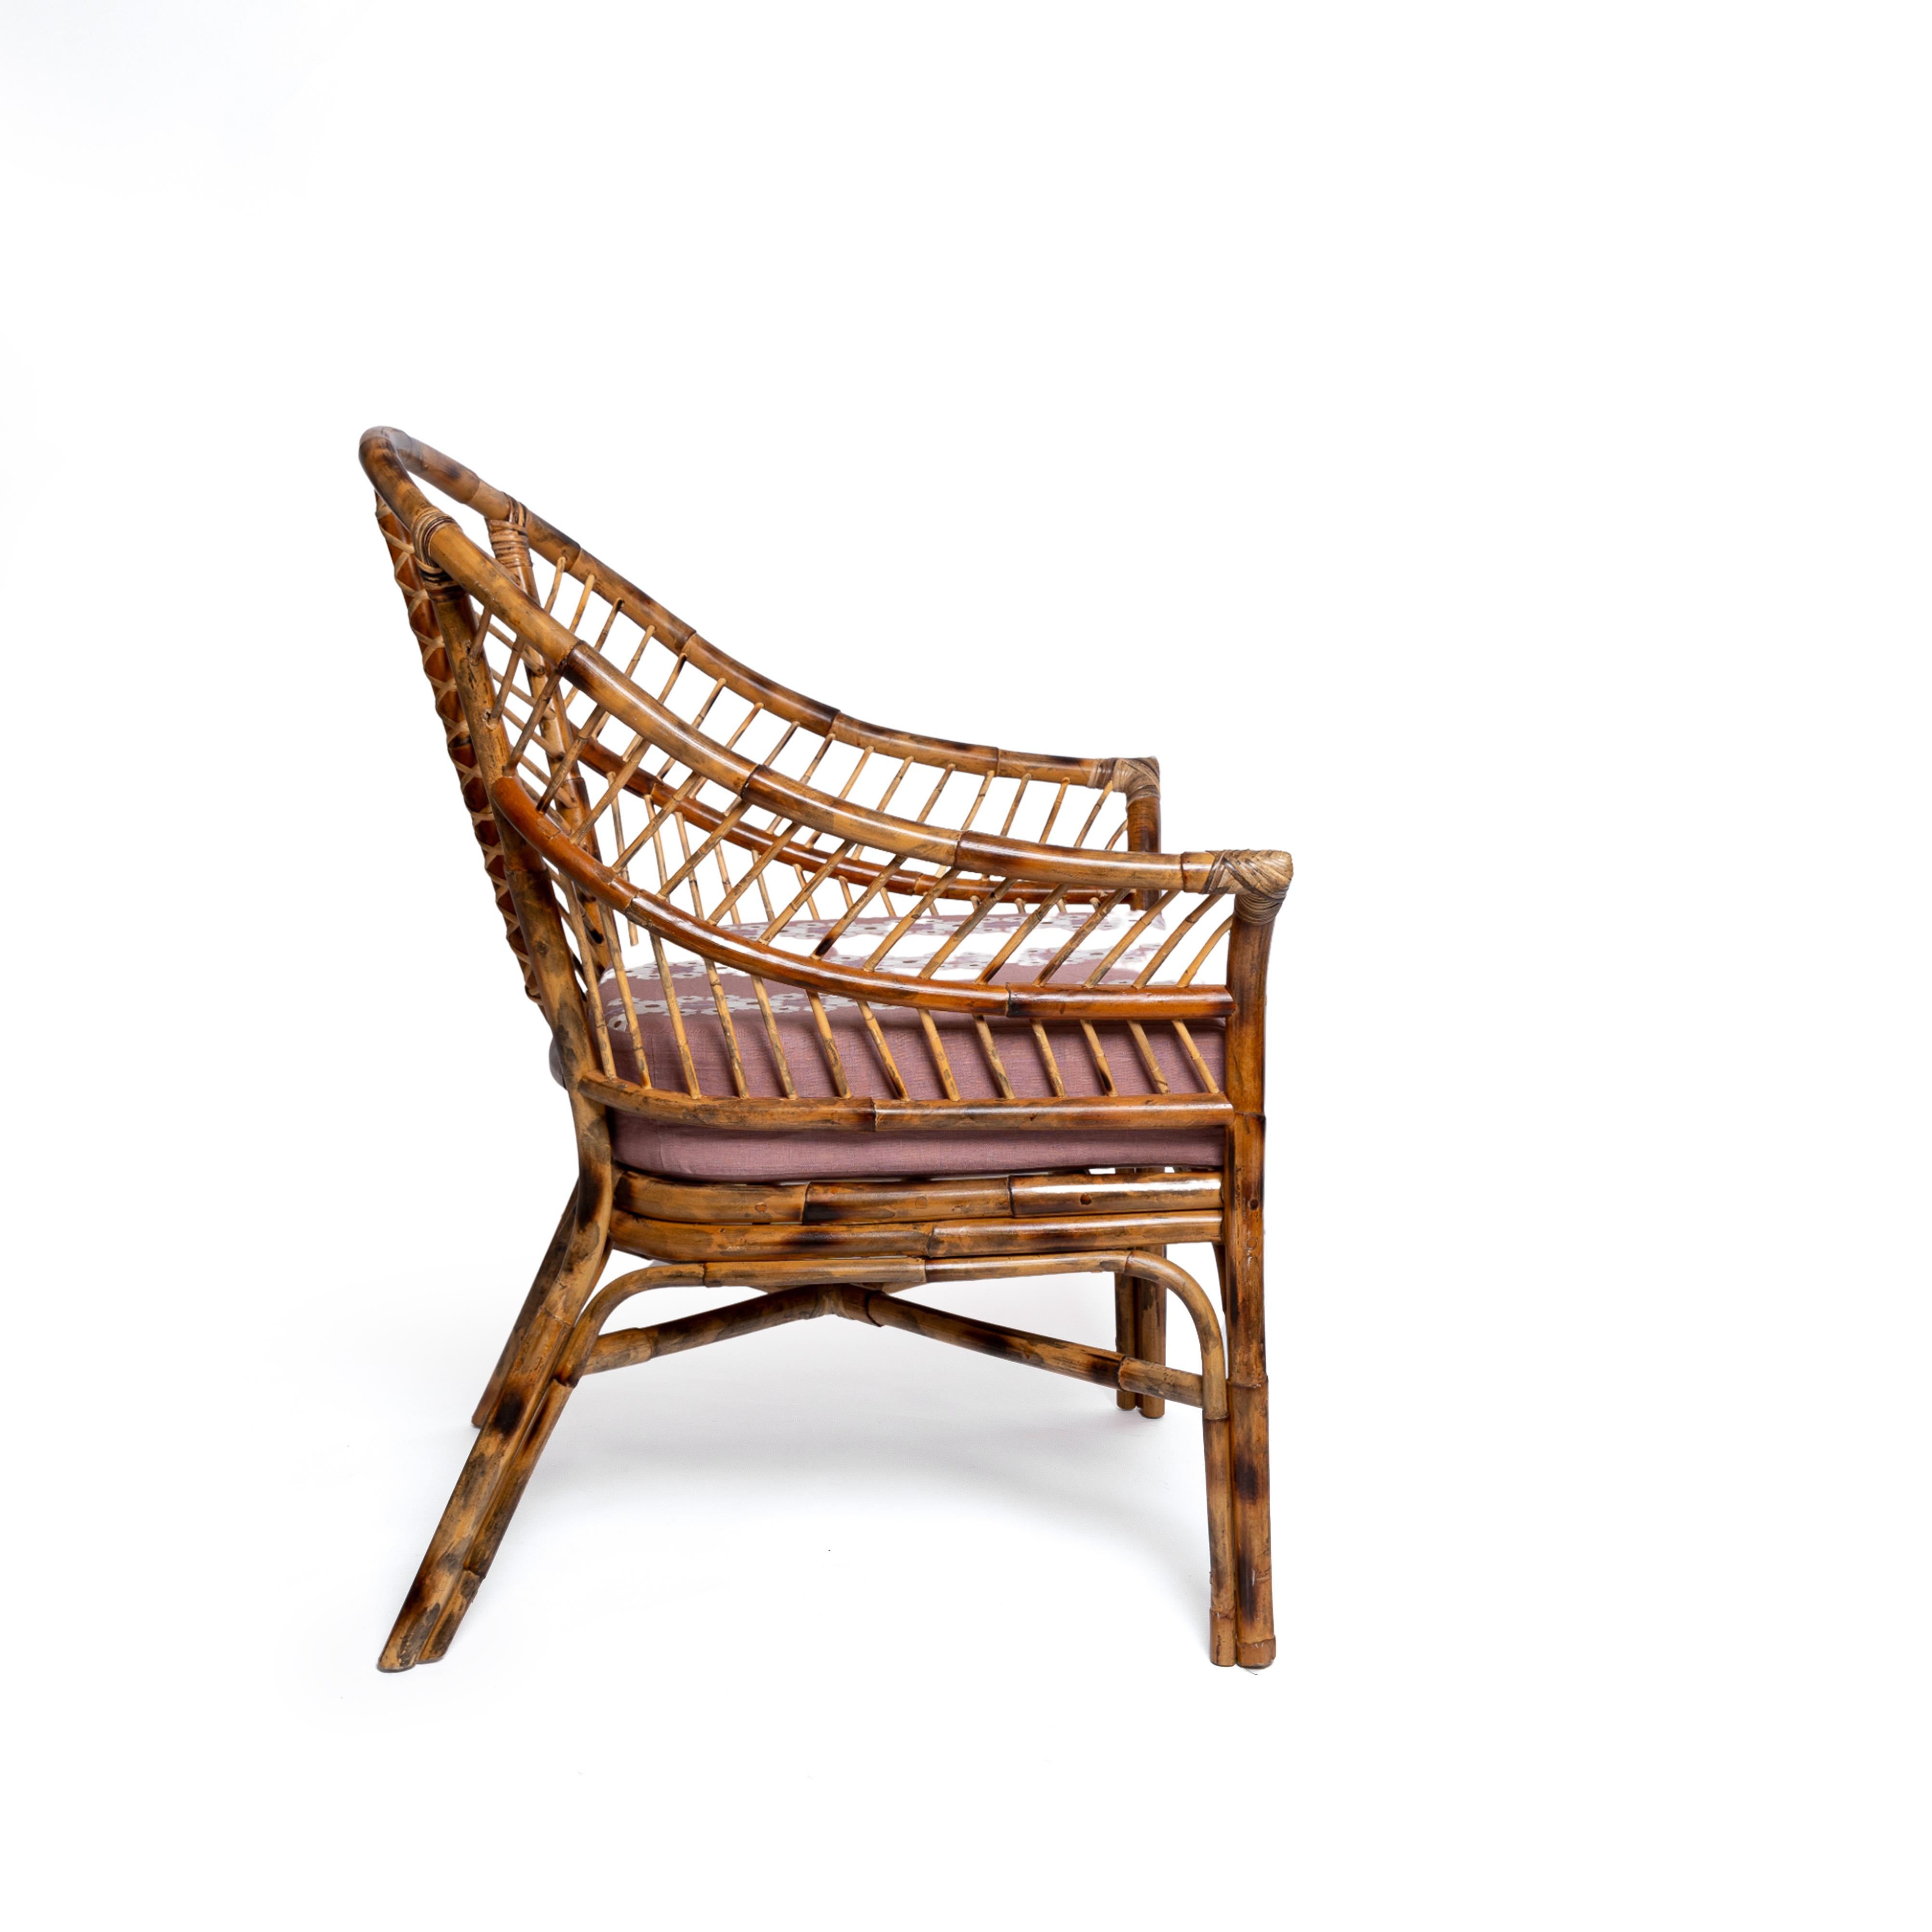 Bamboo Chair in Natural Honey Rattan, Pink Cushion, Modern, by Louise Roe In New Condition For Sale In London, GB